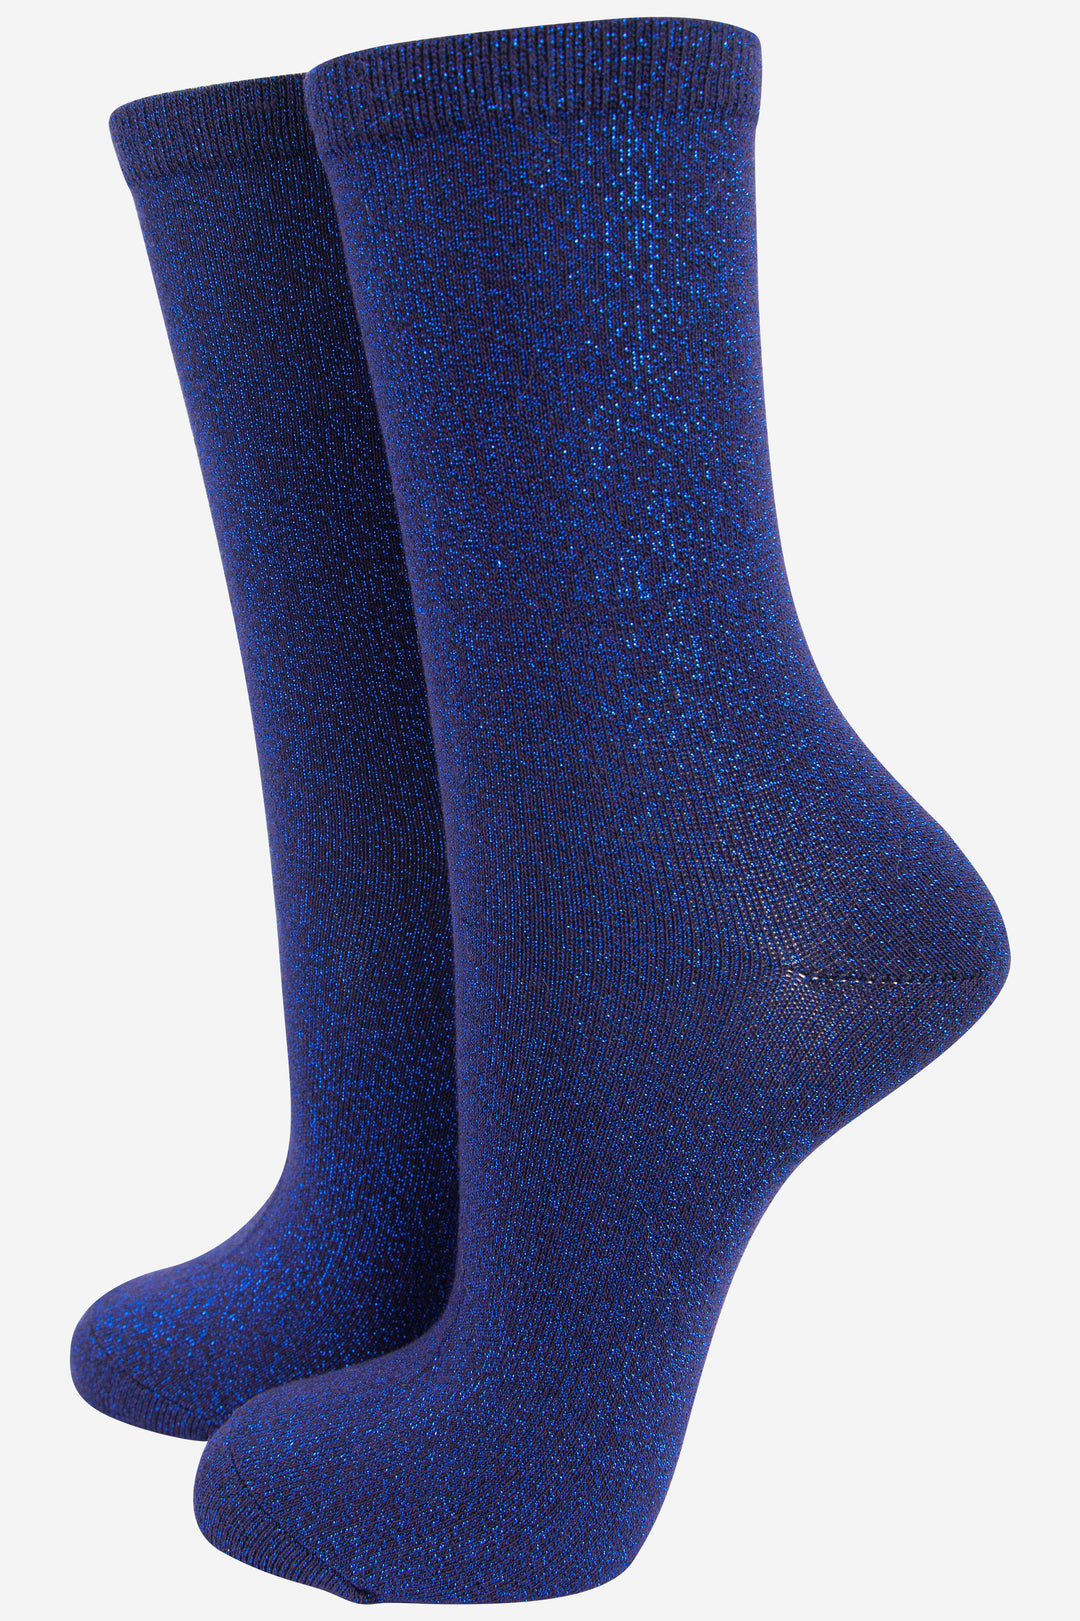 deep blue sparkly ankle socks with an all over glitter shimmer